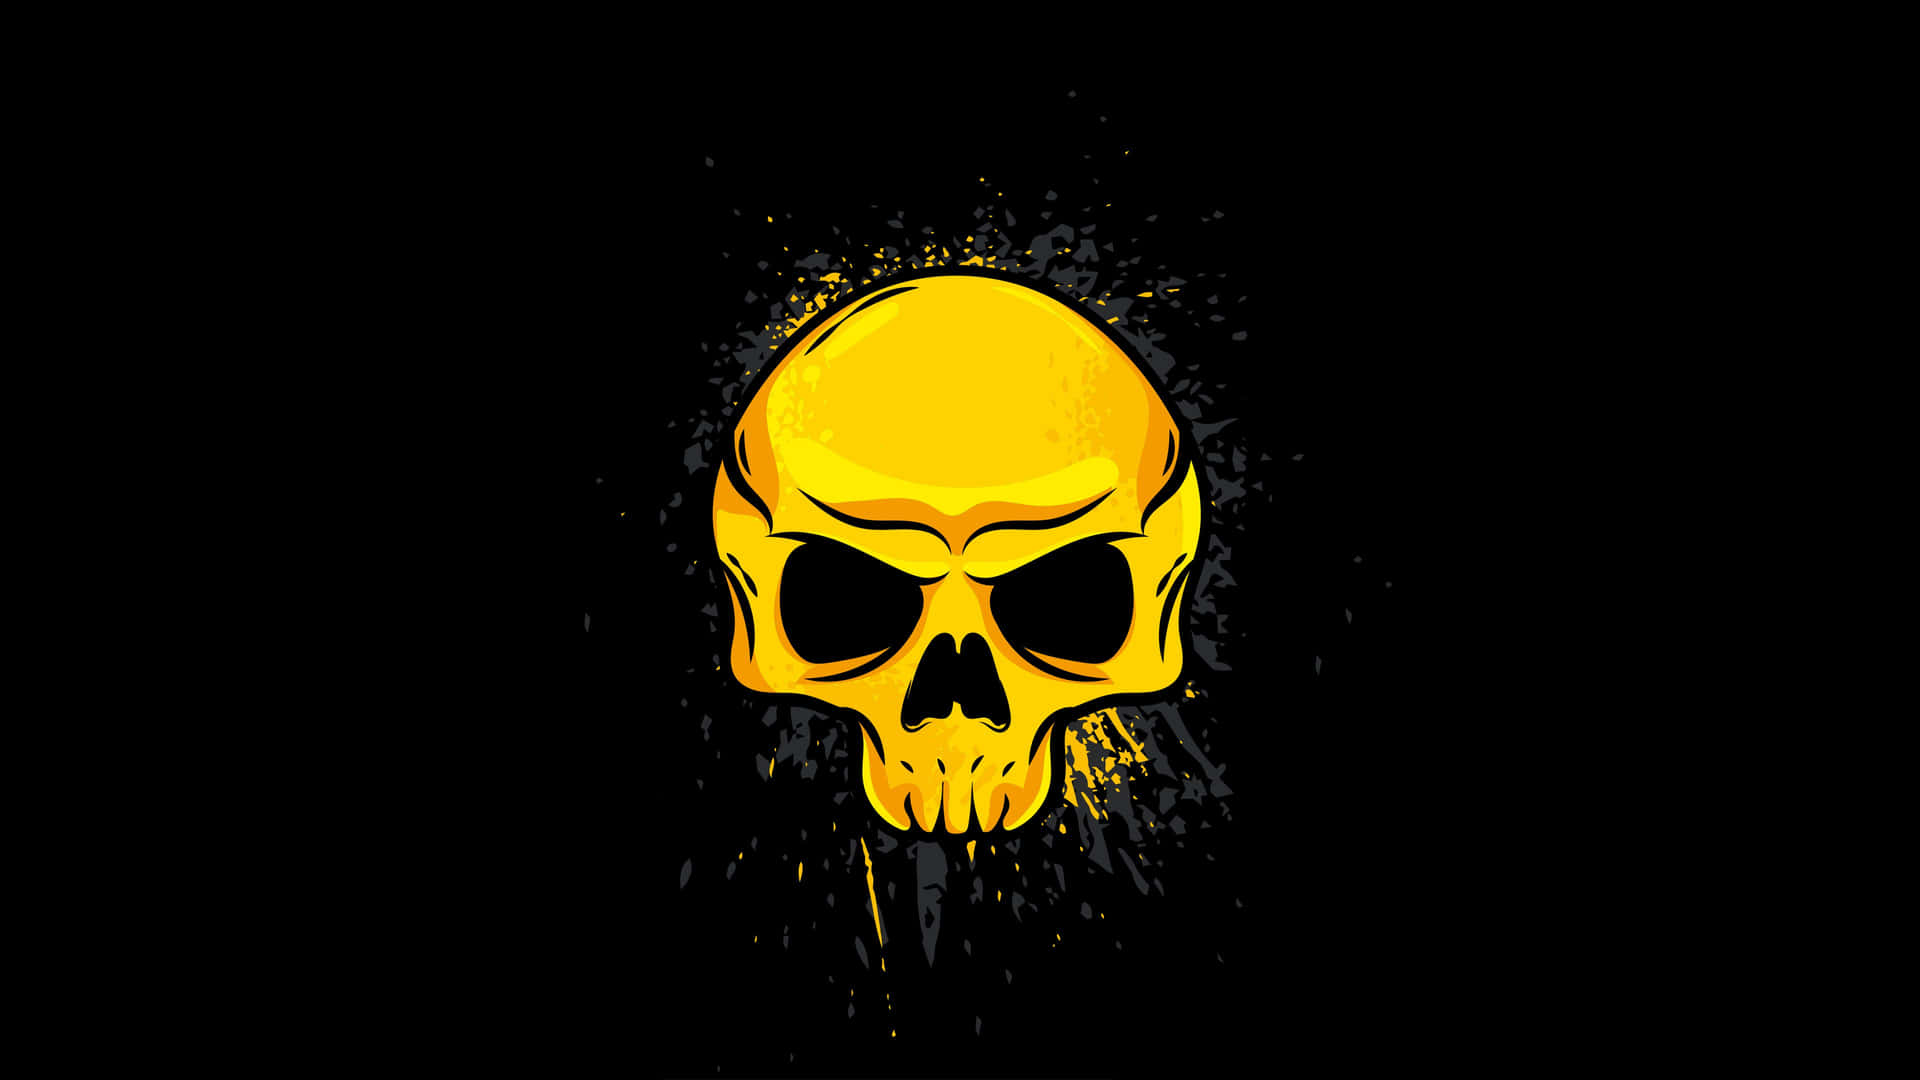 Check out this awesome skull wallpaper! Wallpaper